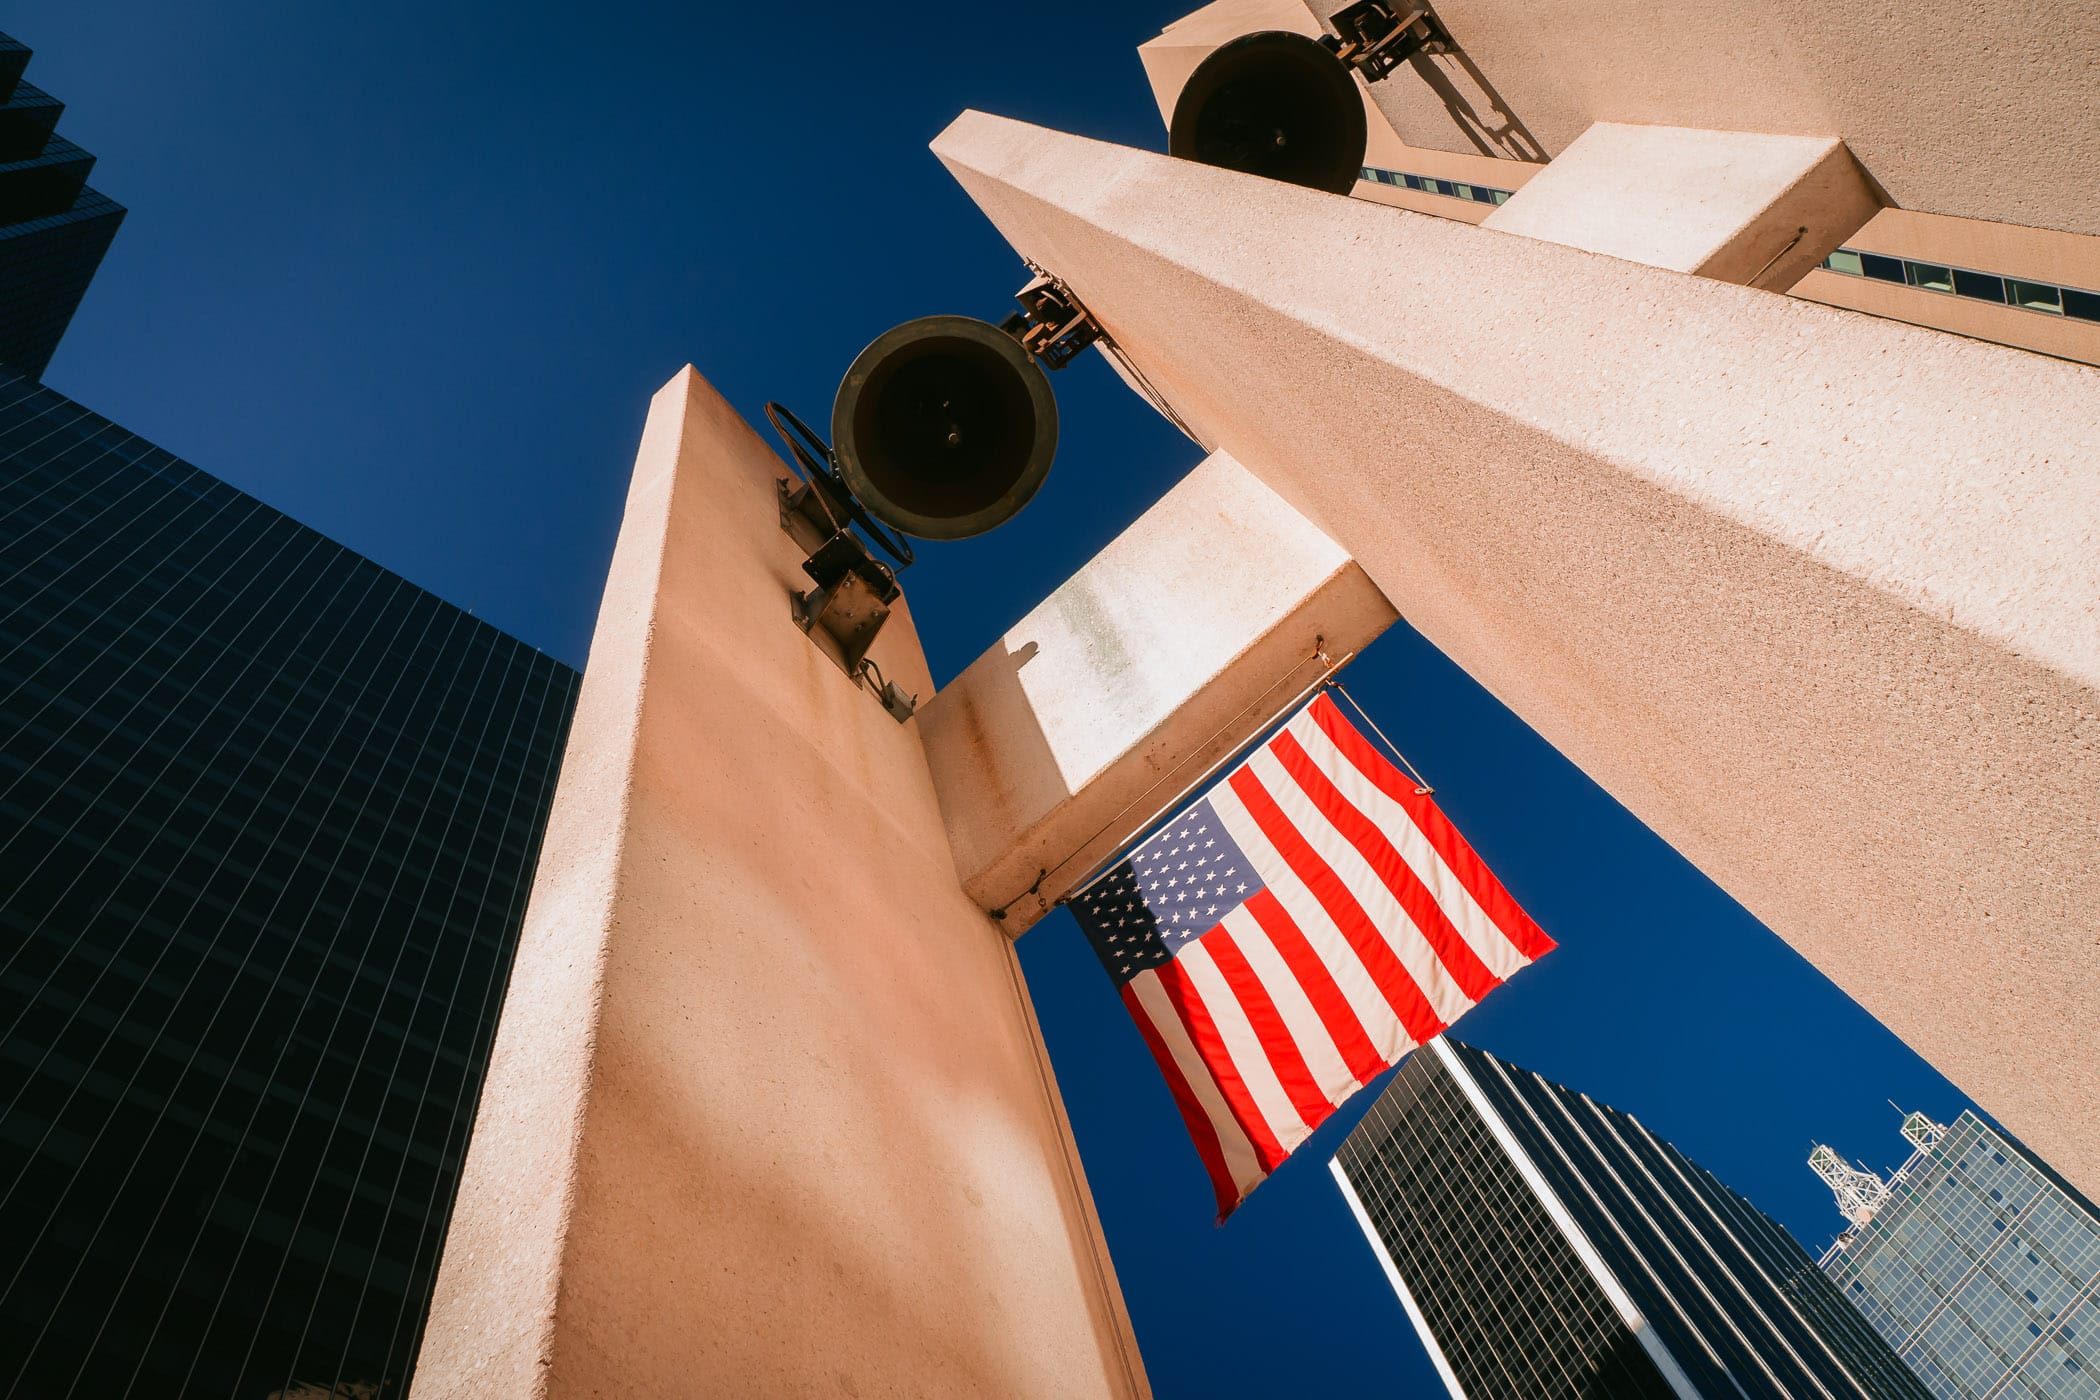 An American flag hangs among the skyscrapers of Downtown Dallas at Thanks-Giving Square.